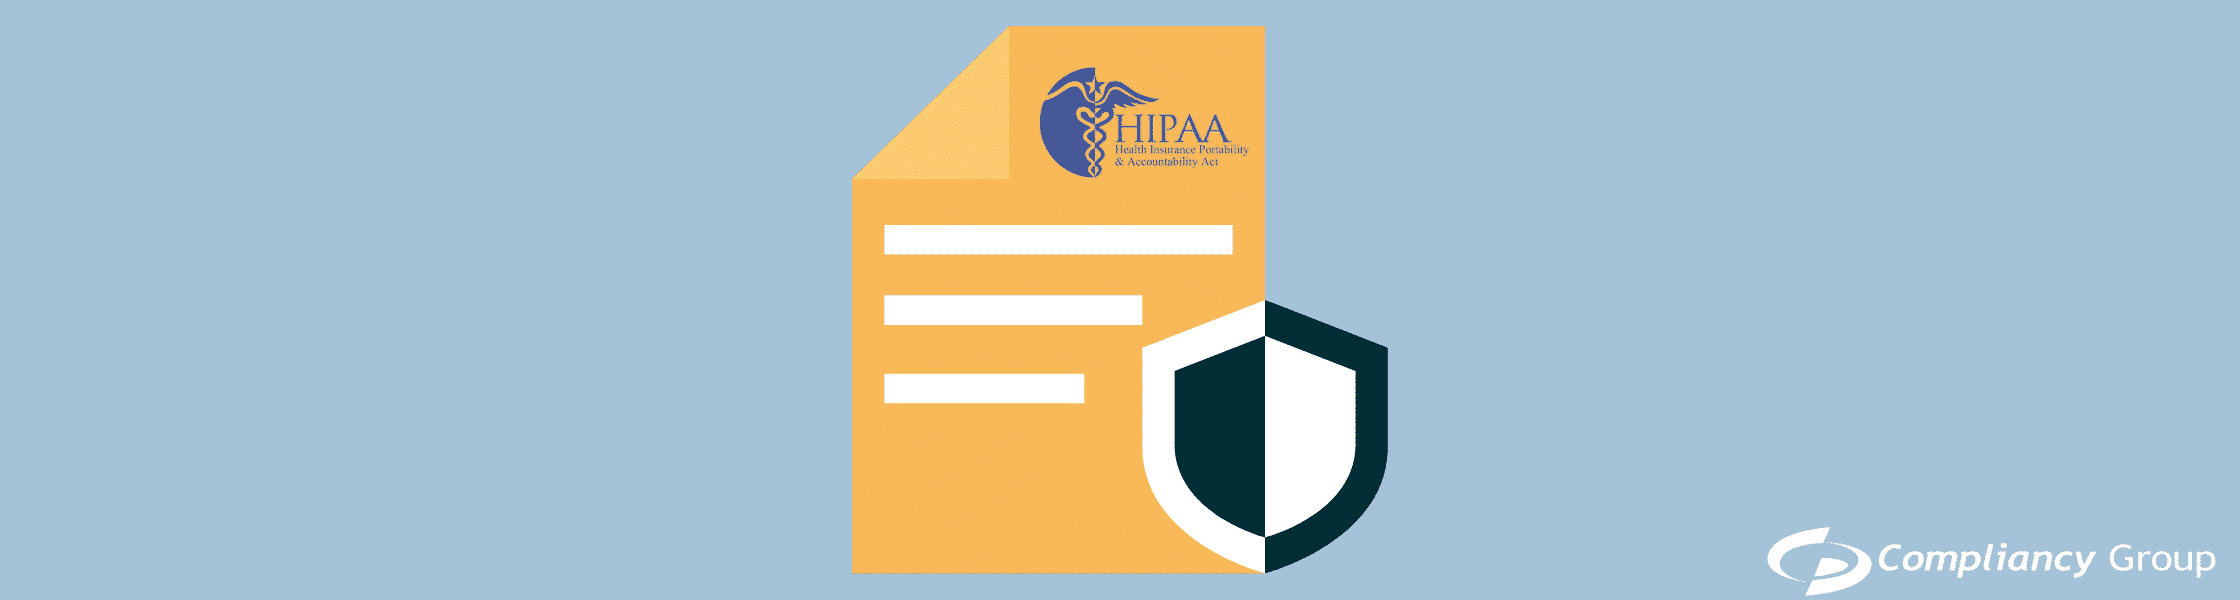 HIPAA workers compensation